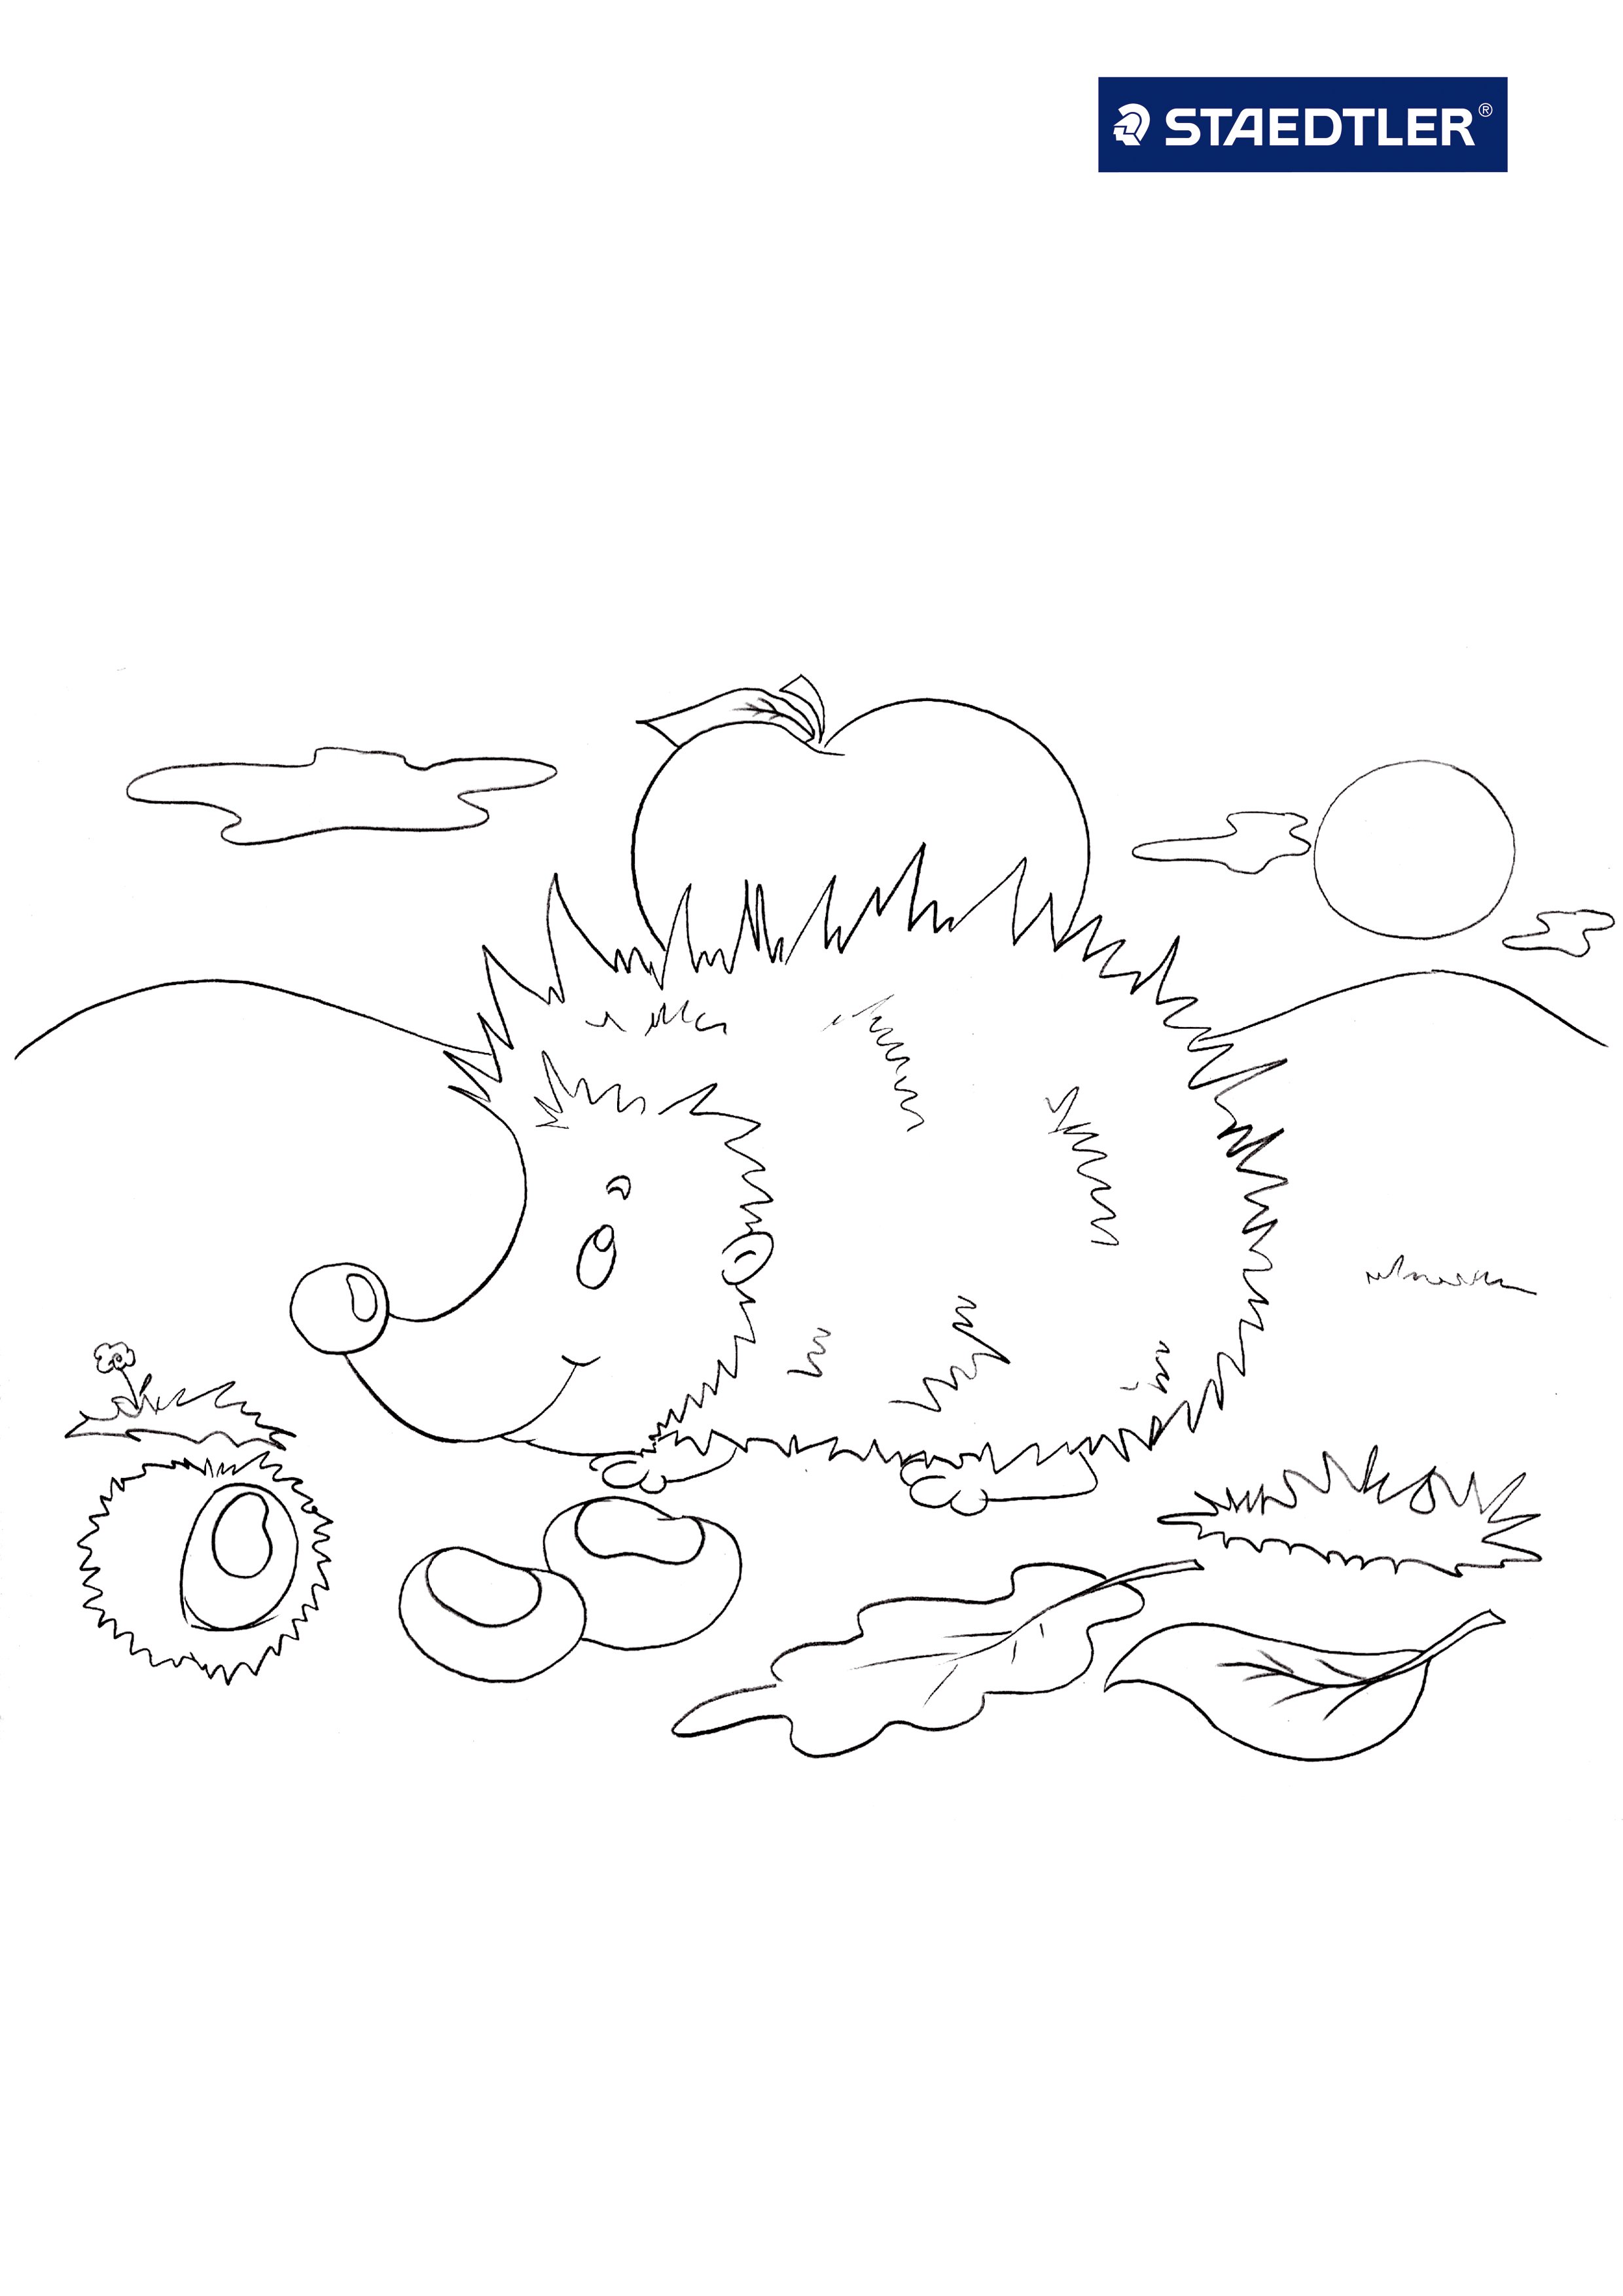 Hedgehog coloring pages to download and print for free